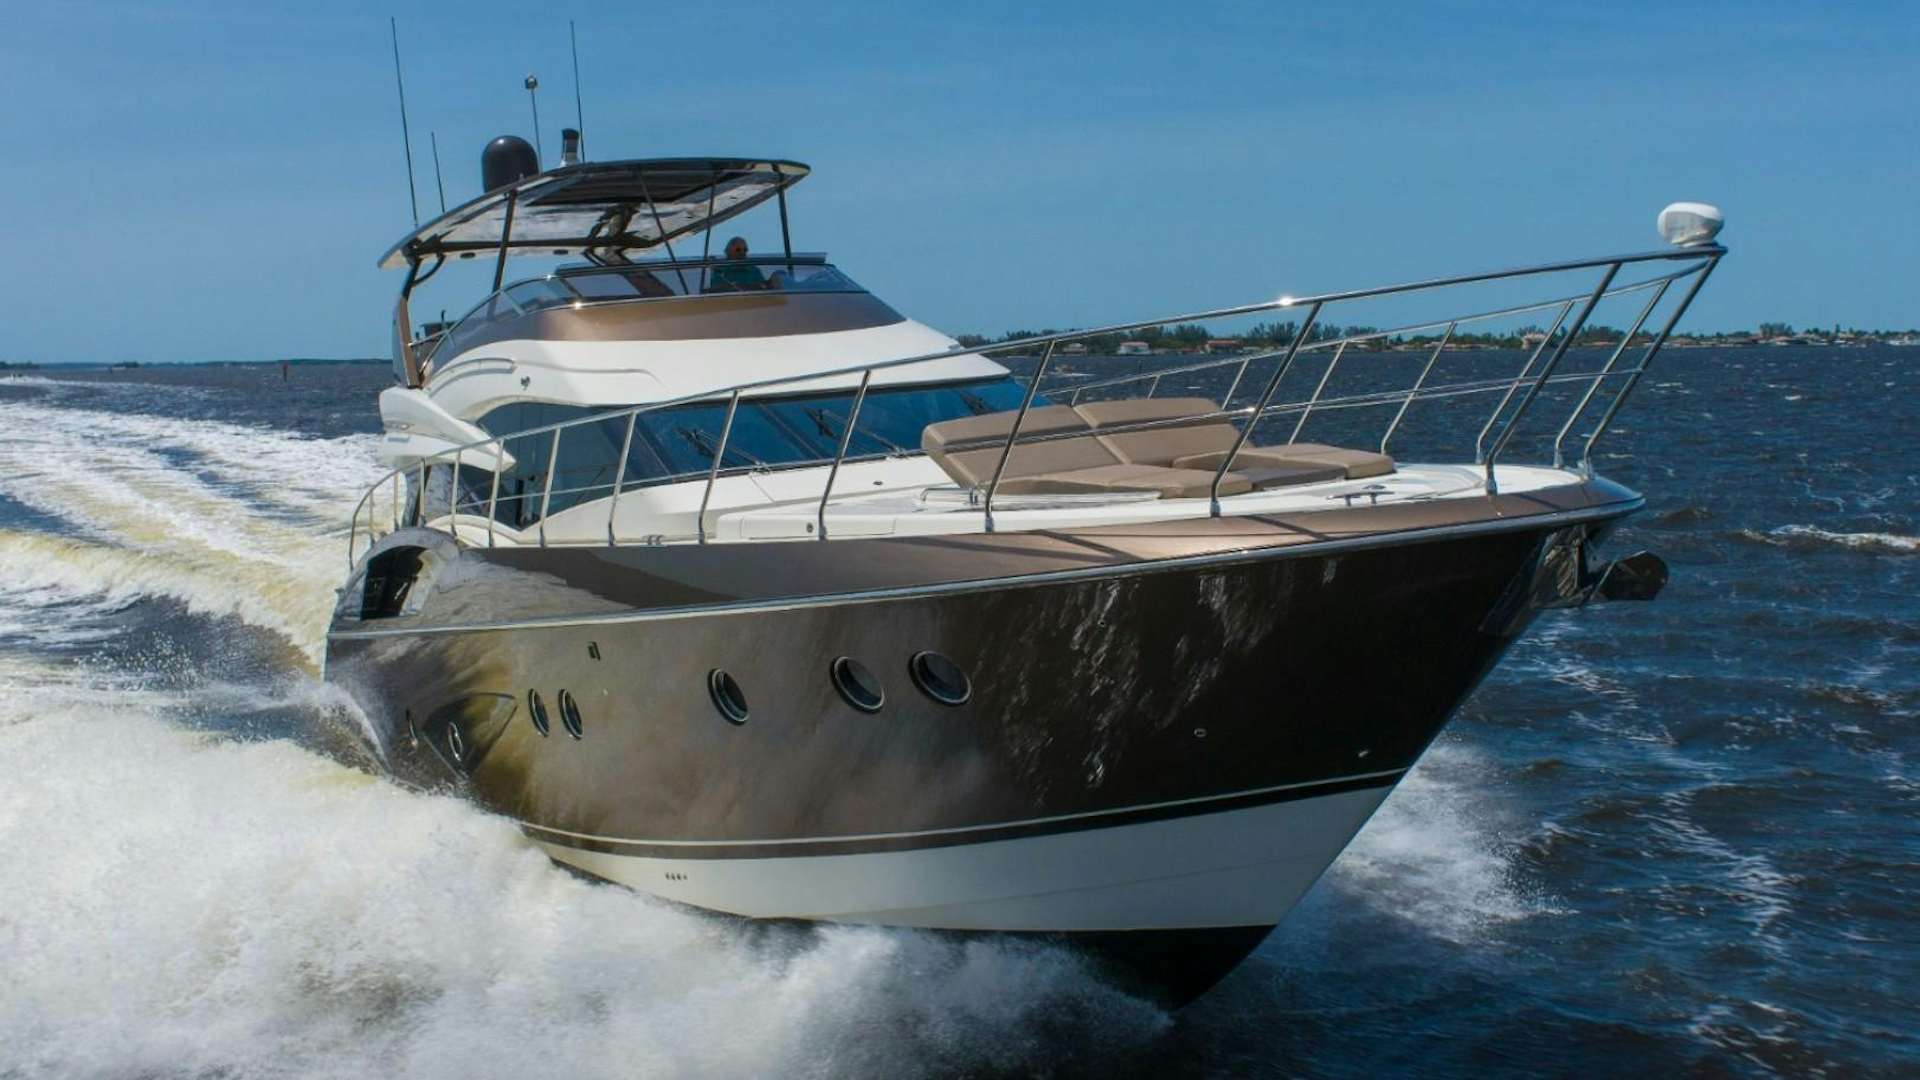 Watch Video for Hassel Free II Yacht for Sale